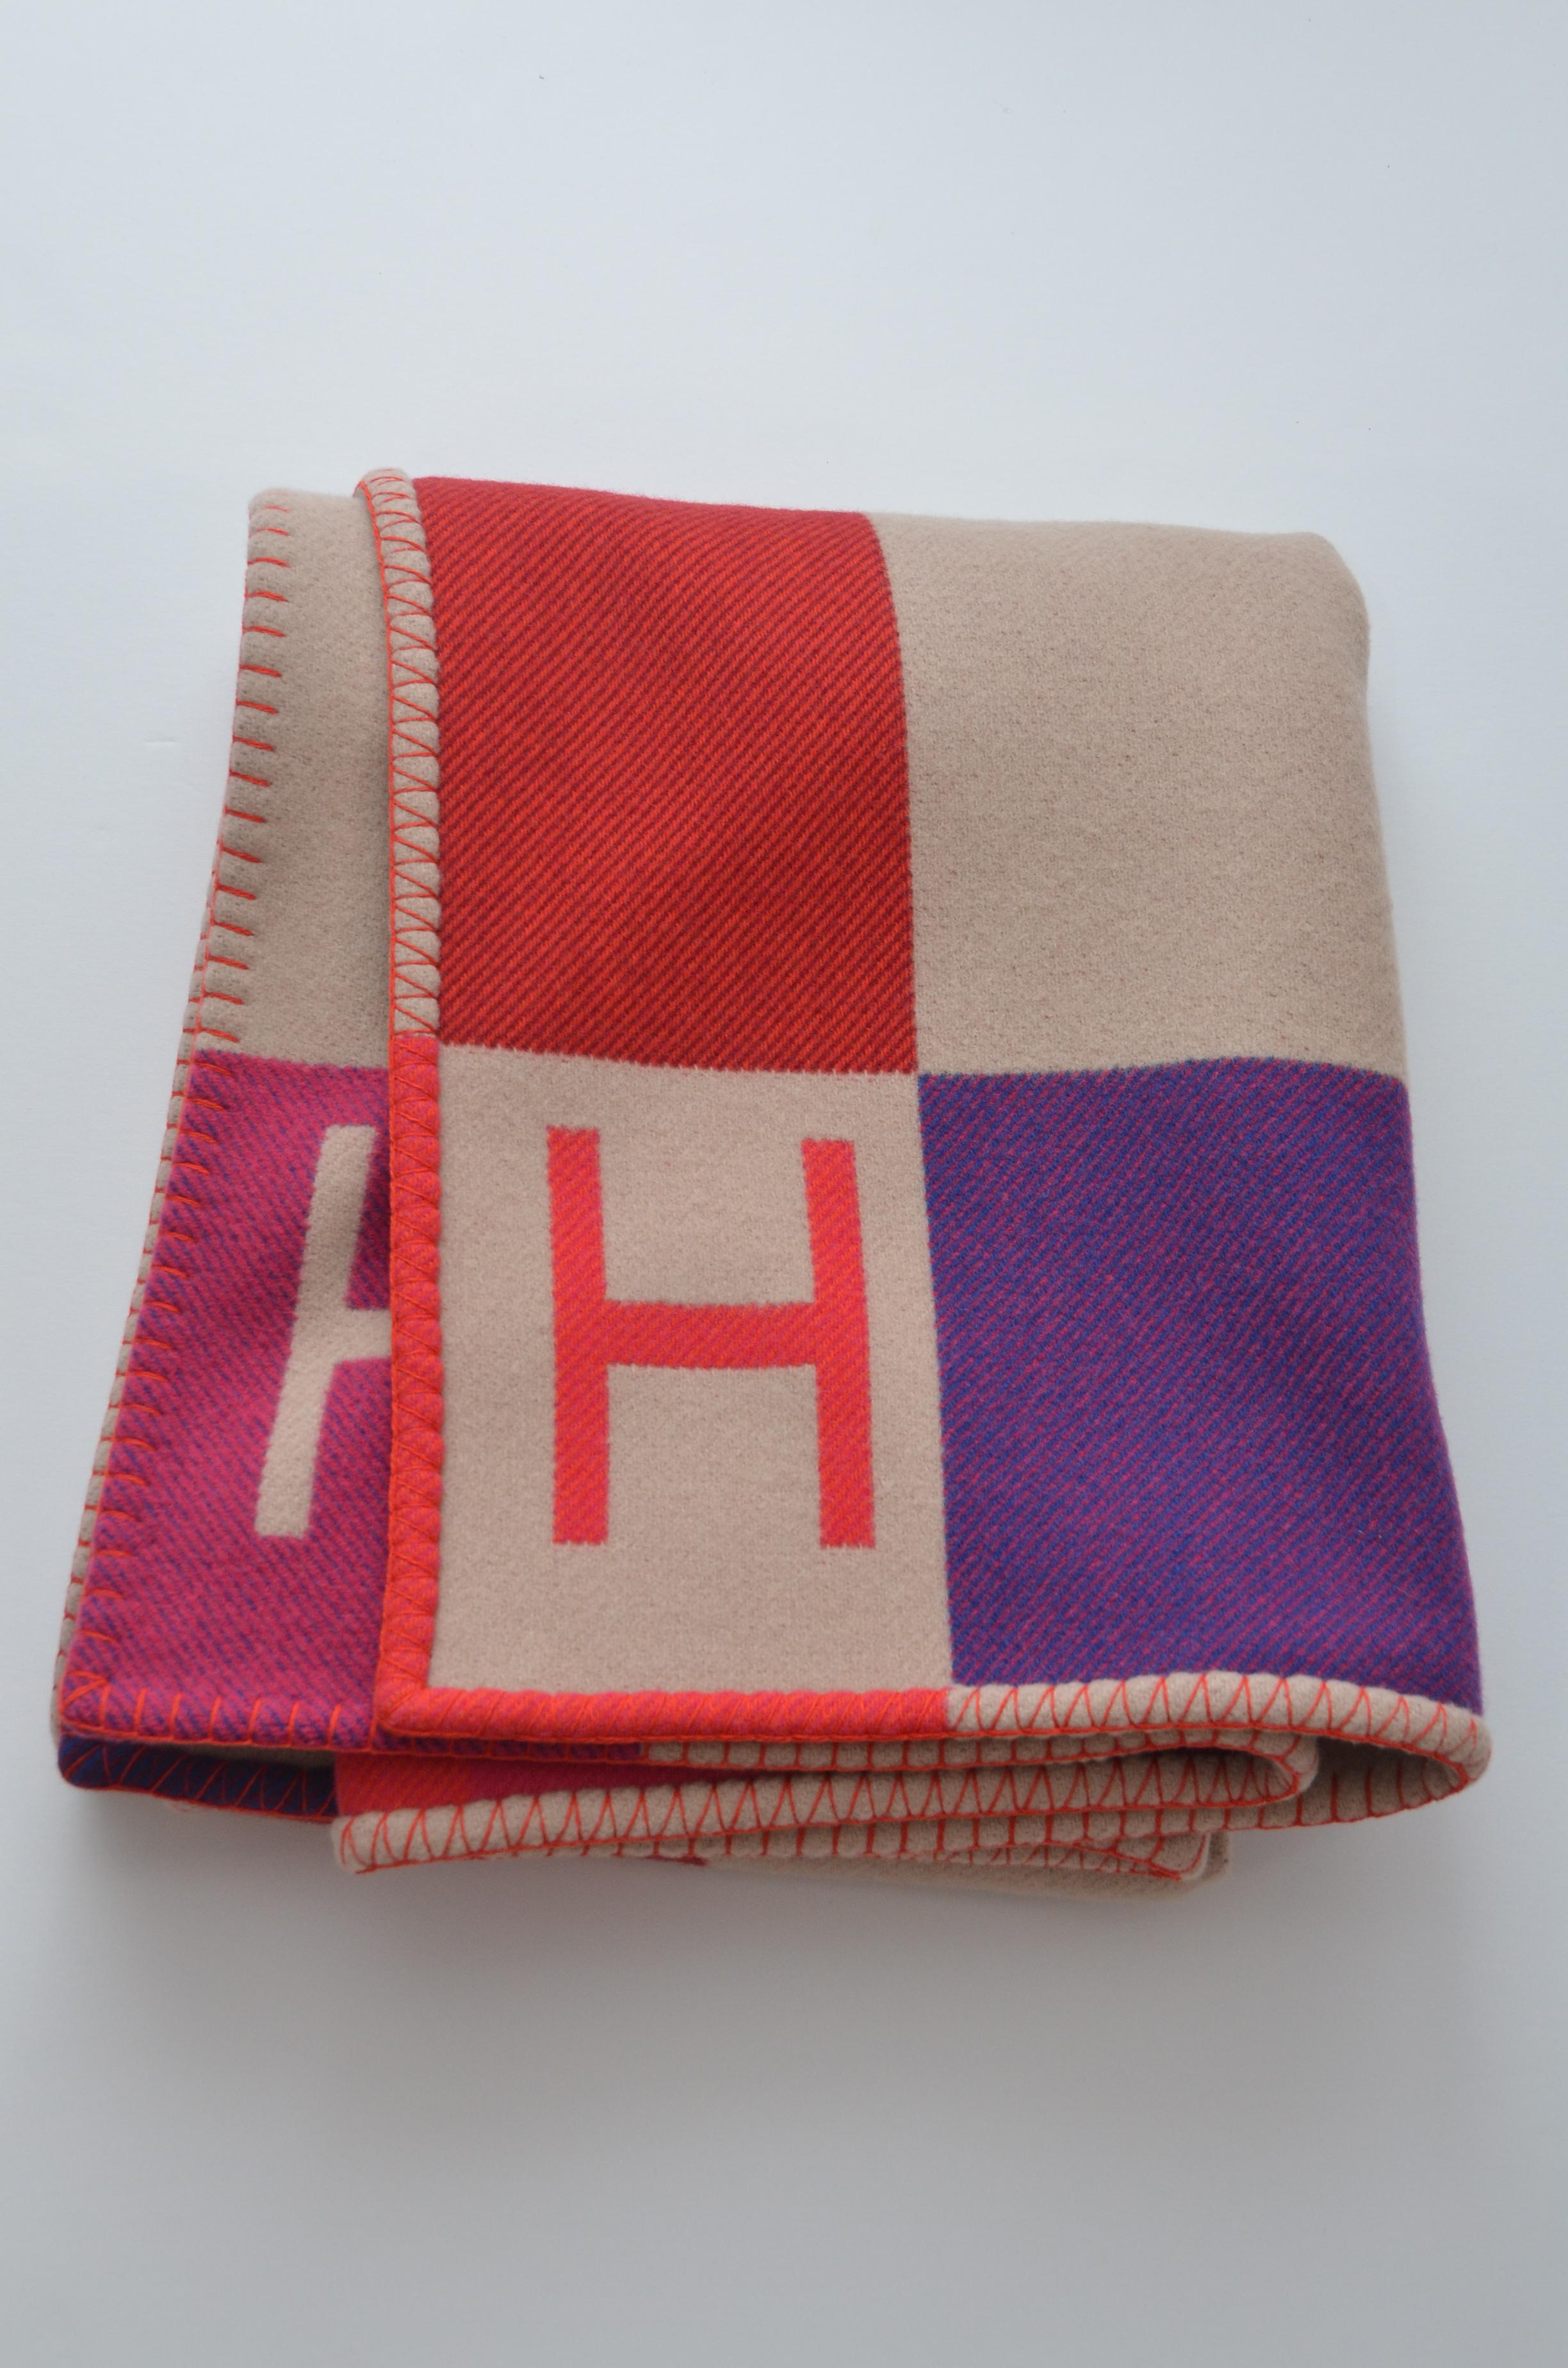 Pink Hermes Blanket Avalon Vibration  Signature H  Beige Fuchsia Throw  New With Box 